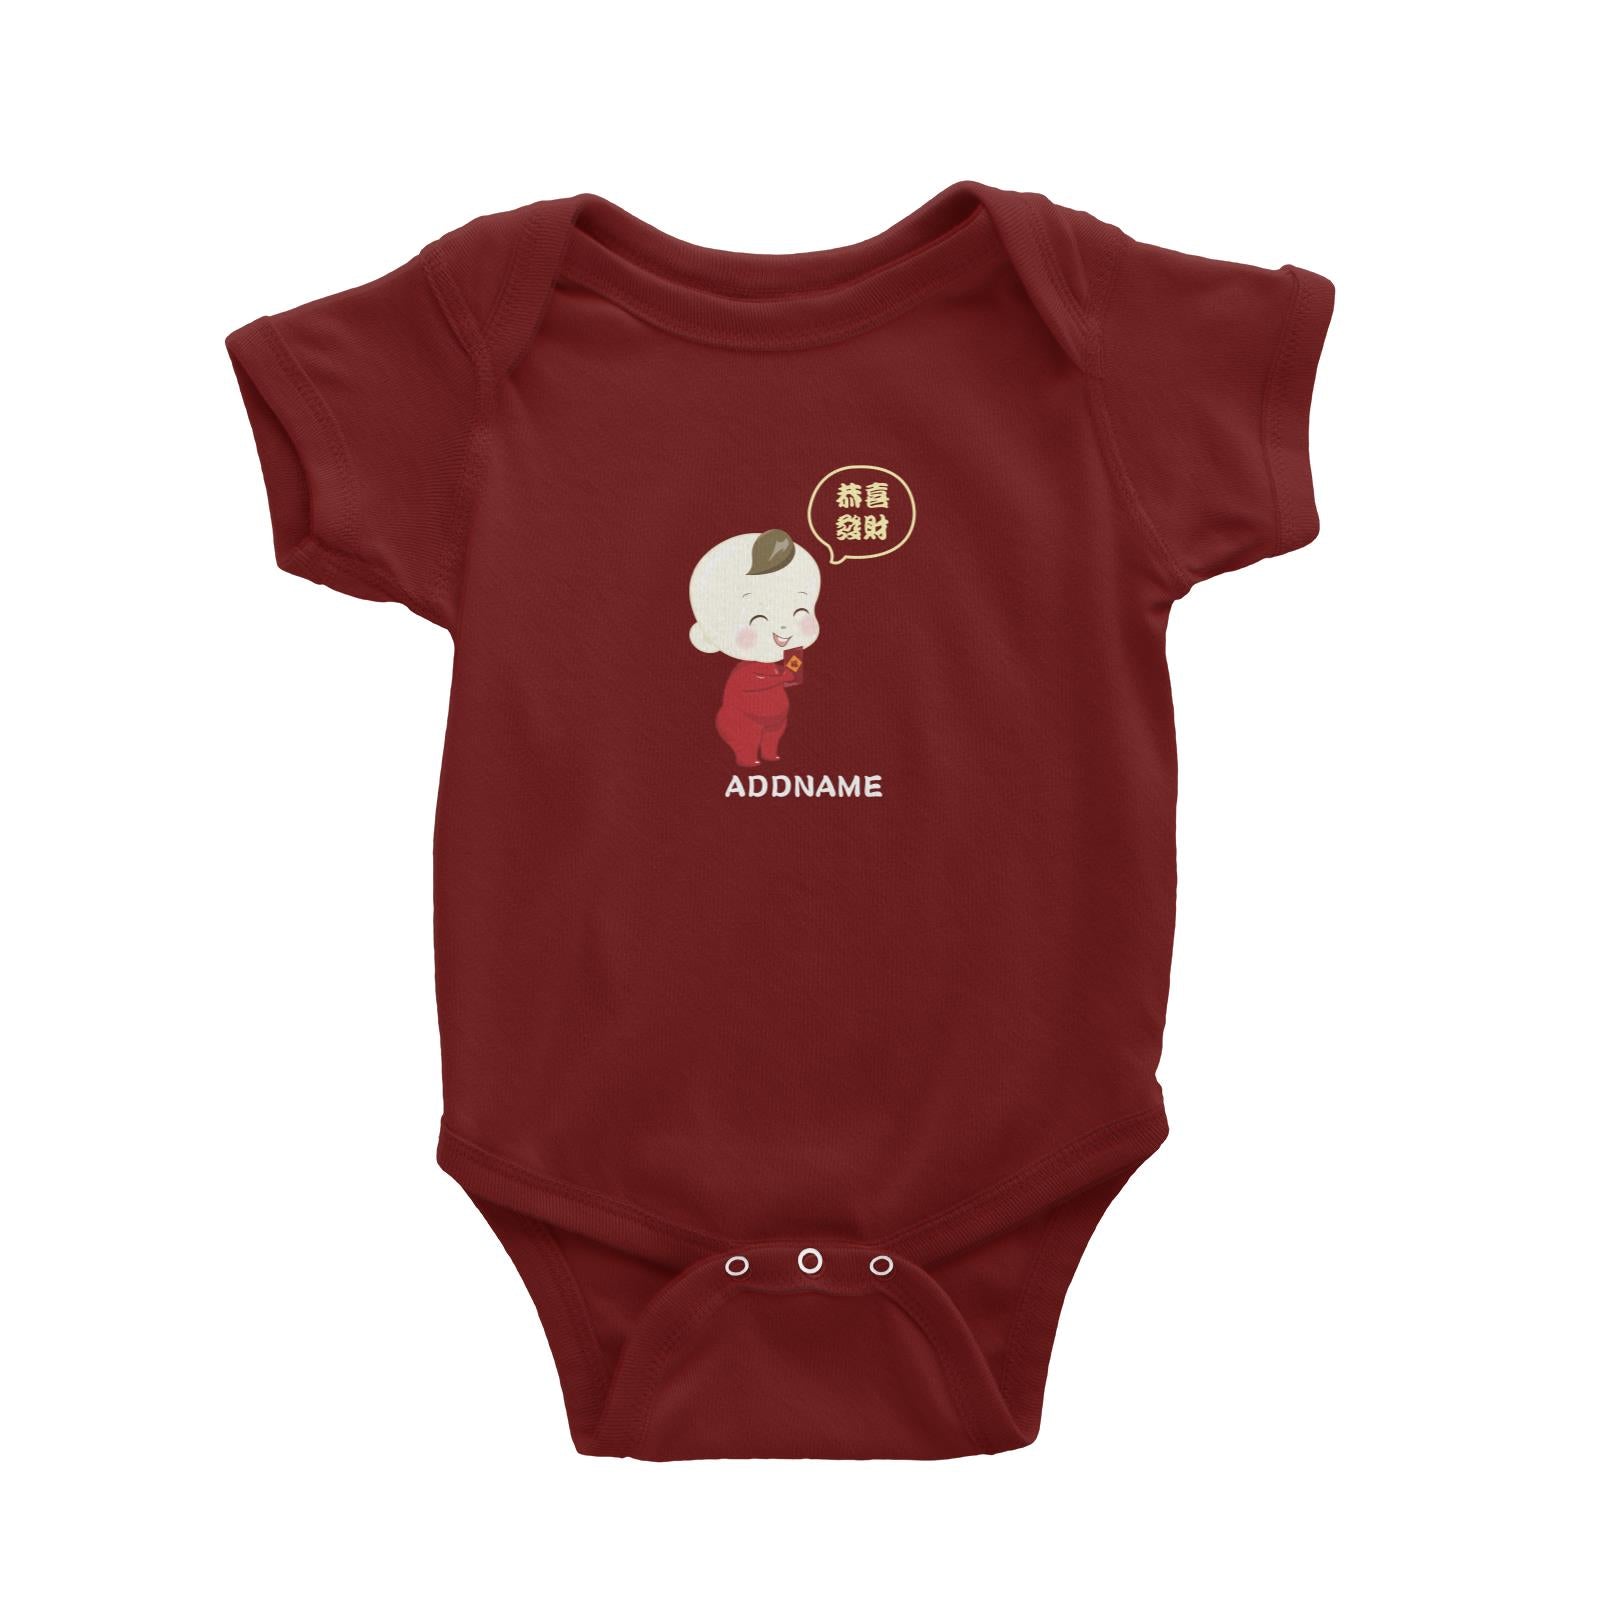 Chinese New Year Family Gong Xi Fai Cai Baby Boy Addname Baby Romper